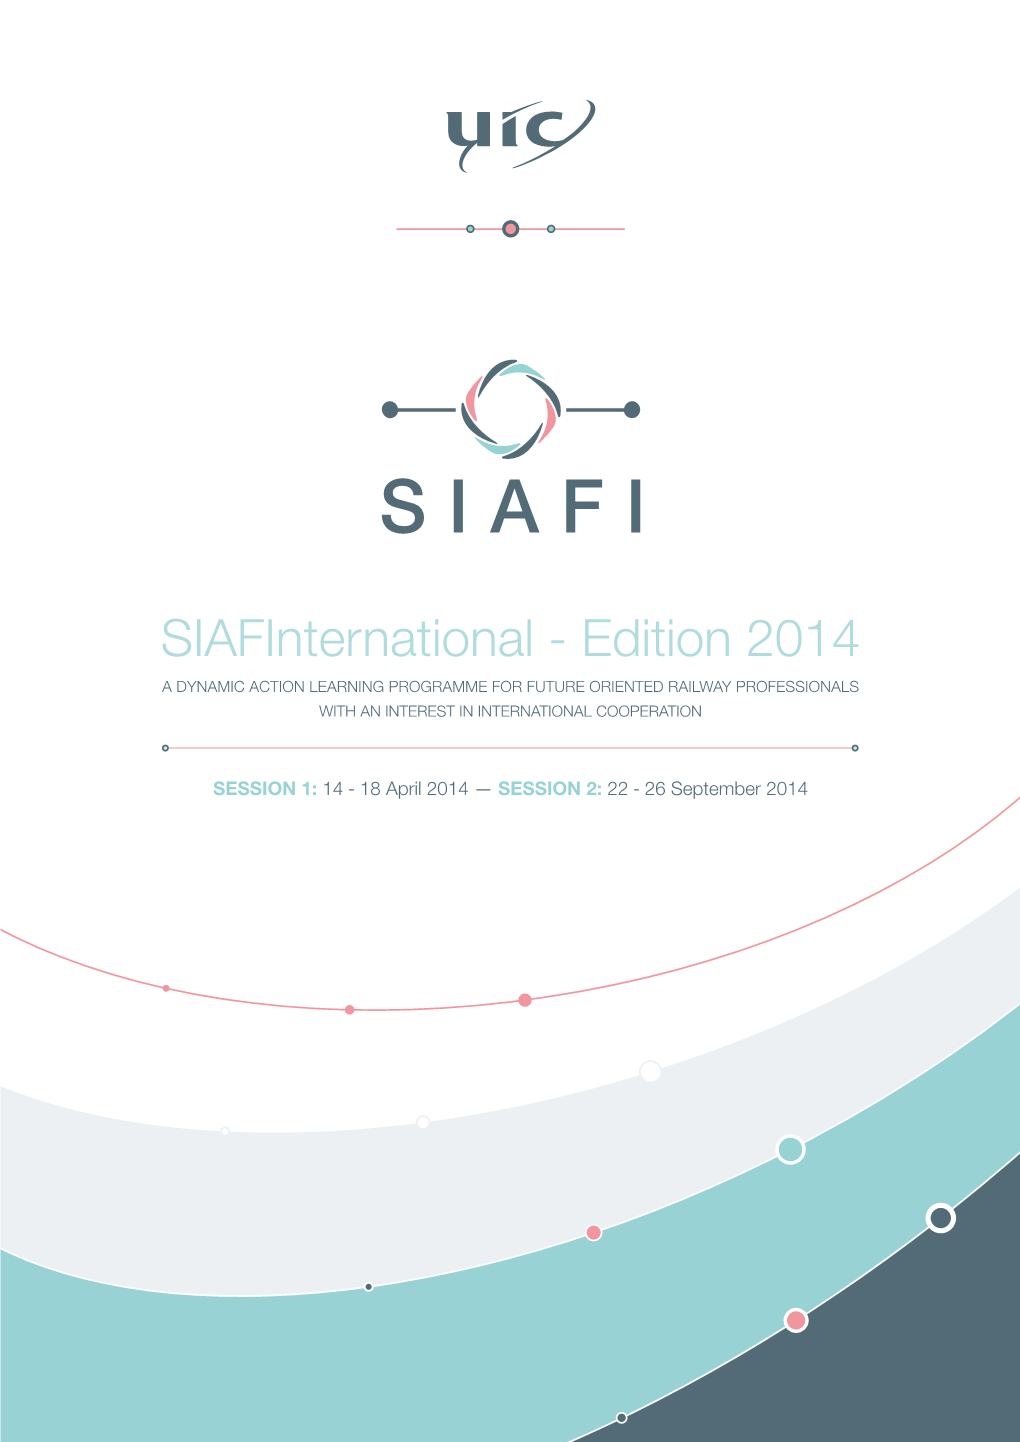 Siafinternational - Edition 2014 a DYNAMIC ACTION LEARNING PROGRAMME for FUTURE ORIENTED RAILWAY PROFESSIONALS with an INTEREST in INTERNATIONAL COOPERATION